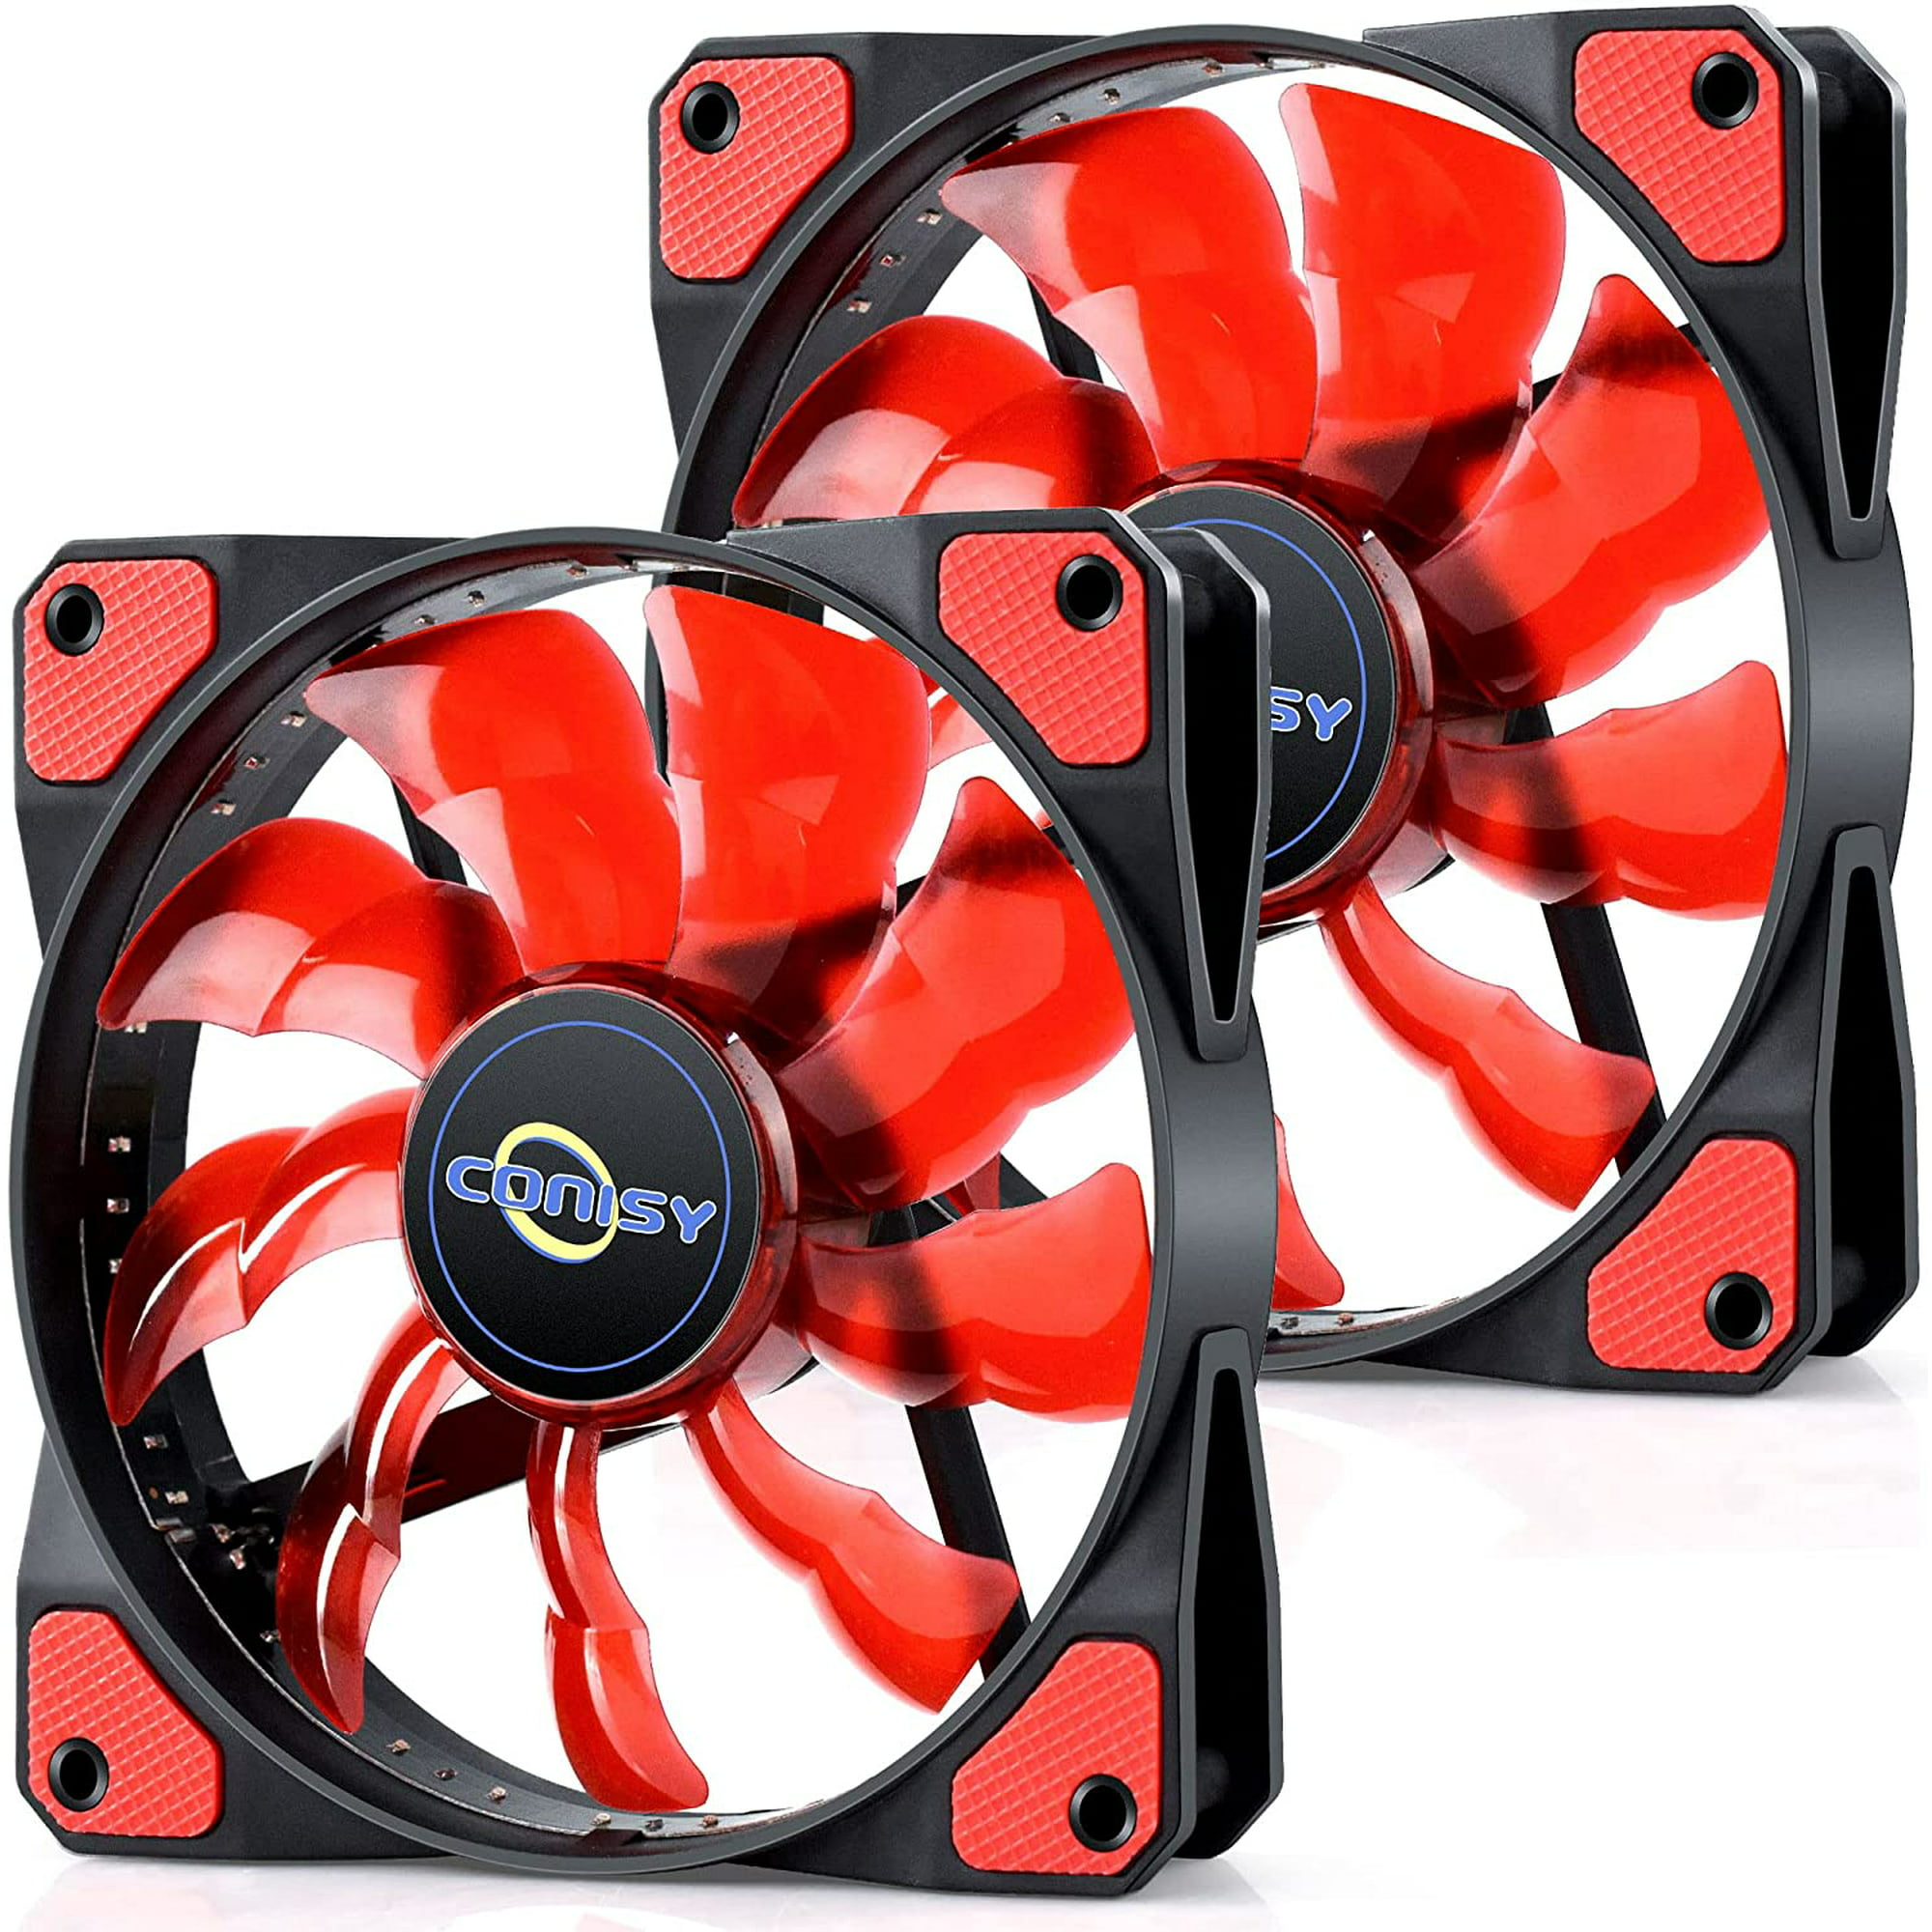 Hong Kong Thaw, thaw, frost thaw Rusty CONISY 120mm PC Case Cooling Fan Super Silent Computer High Airflow Cooler  Fans - red (2 Pack) | Walmart Canada